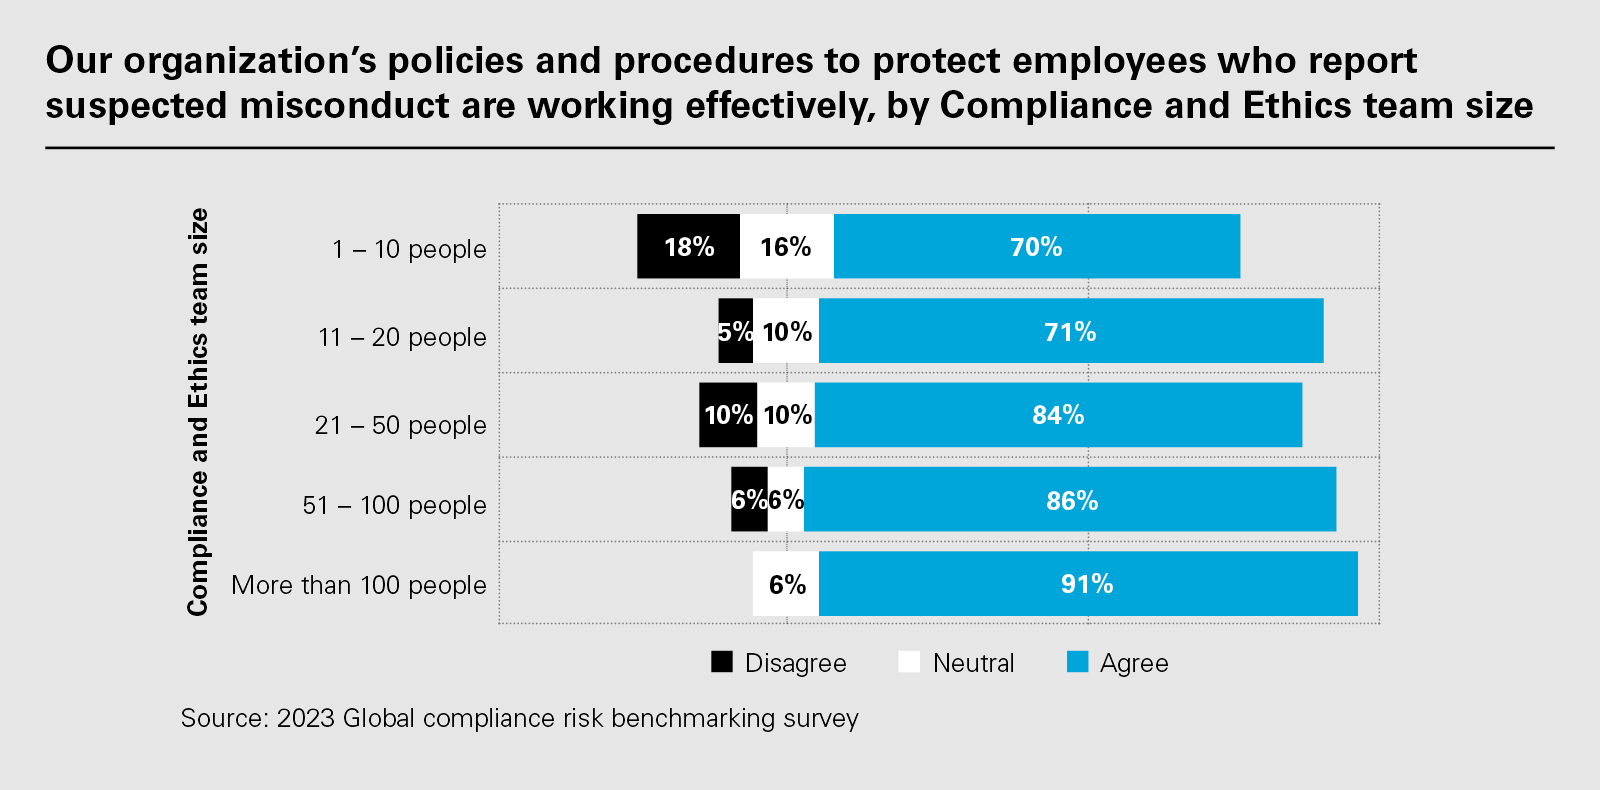 Our organization‘s policies and procedures to protect employees who report suspected misconduct are working effectively, by Compliance and Ethics team size (PNG)